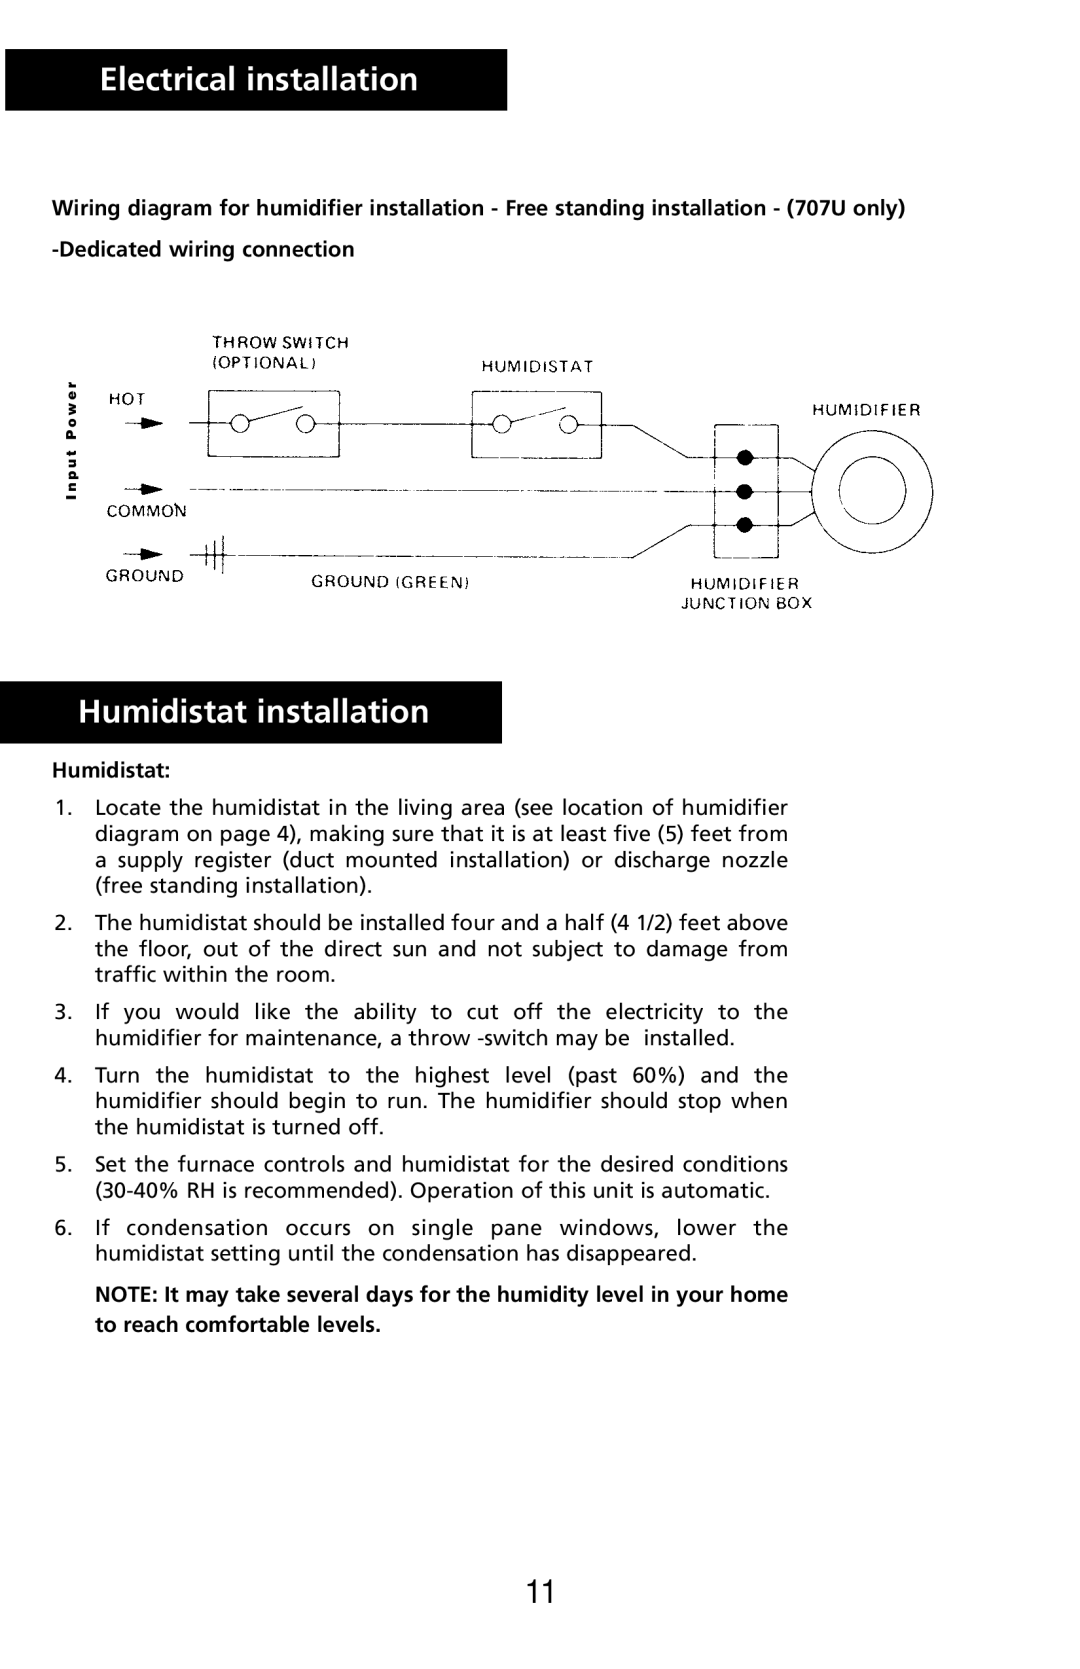 Herrmidifier Co 707U-UK specifications Humidistat installation, Dedicatedwiring connection, to reach comfortable levels 